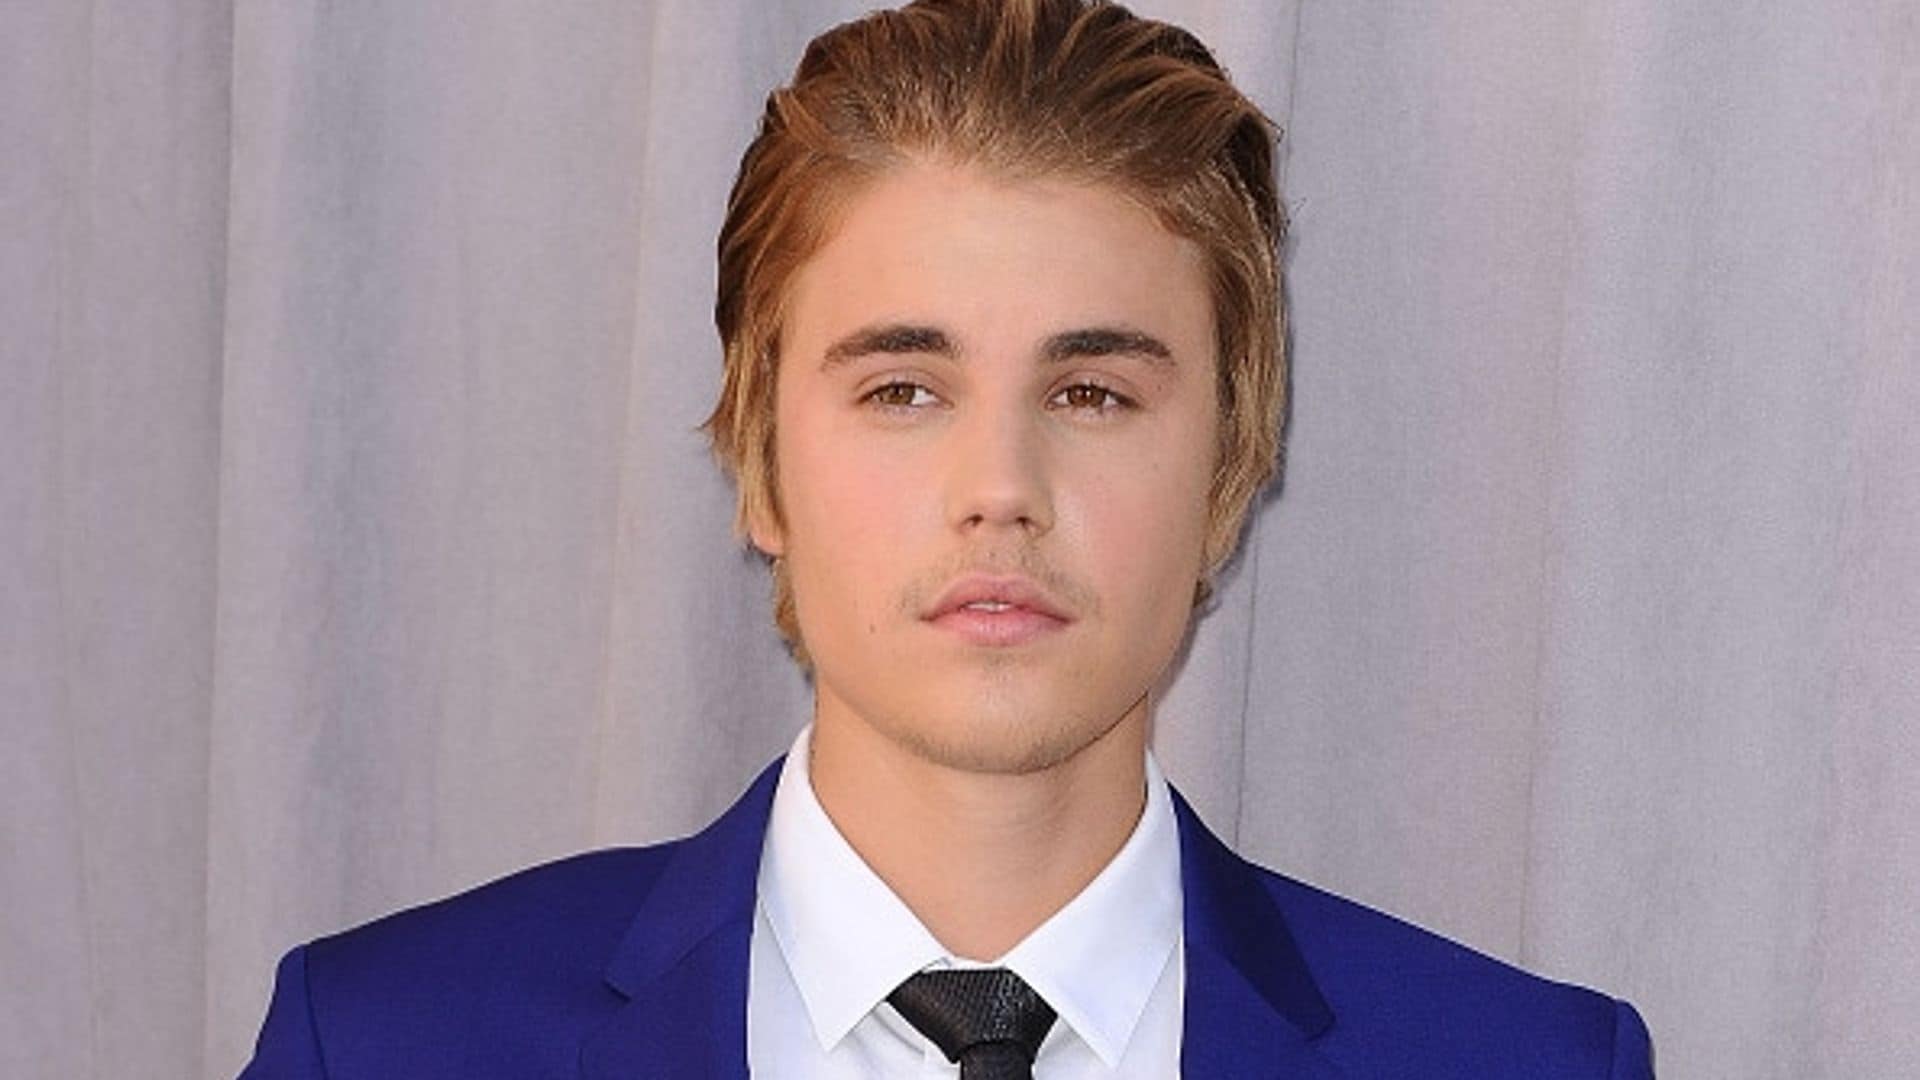 Justin Bieber is so hot right now: singer set to appear in 'Zoolander 2'